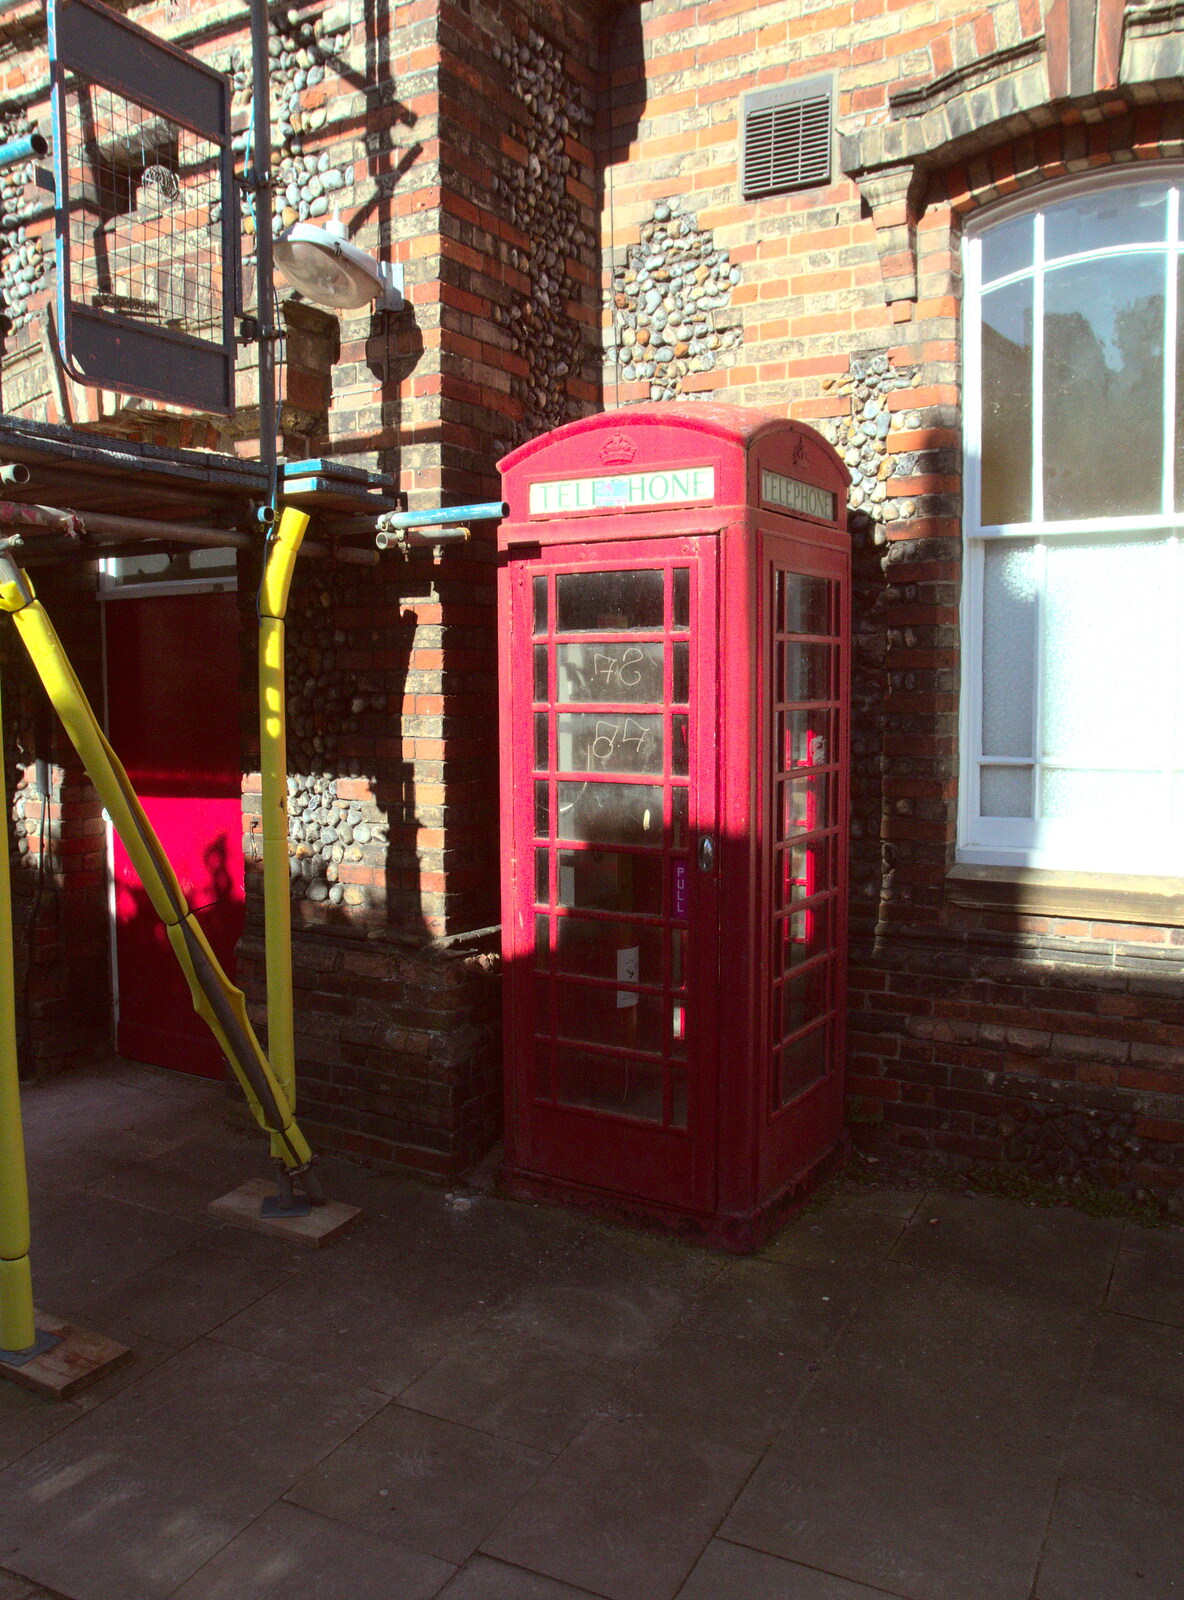 A Walk Around Eye, and the Return of Red Tent, Suffolk and London - 25th February 2018: The K6 phonebox by the Town Hall is looking jaded